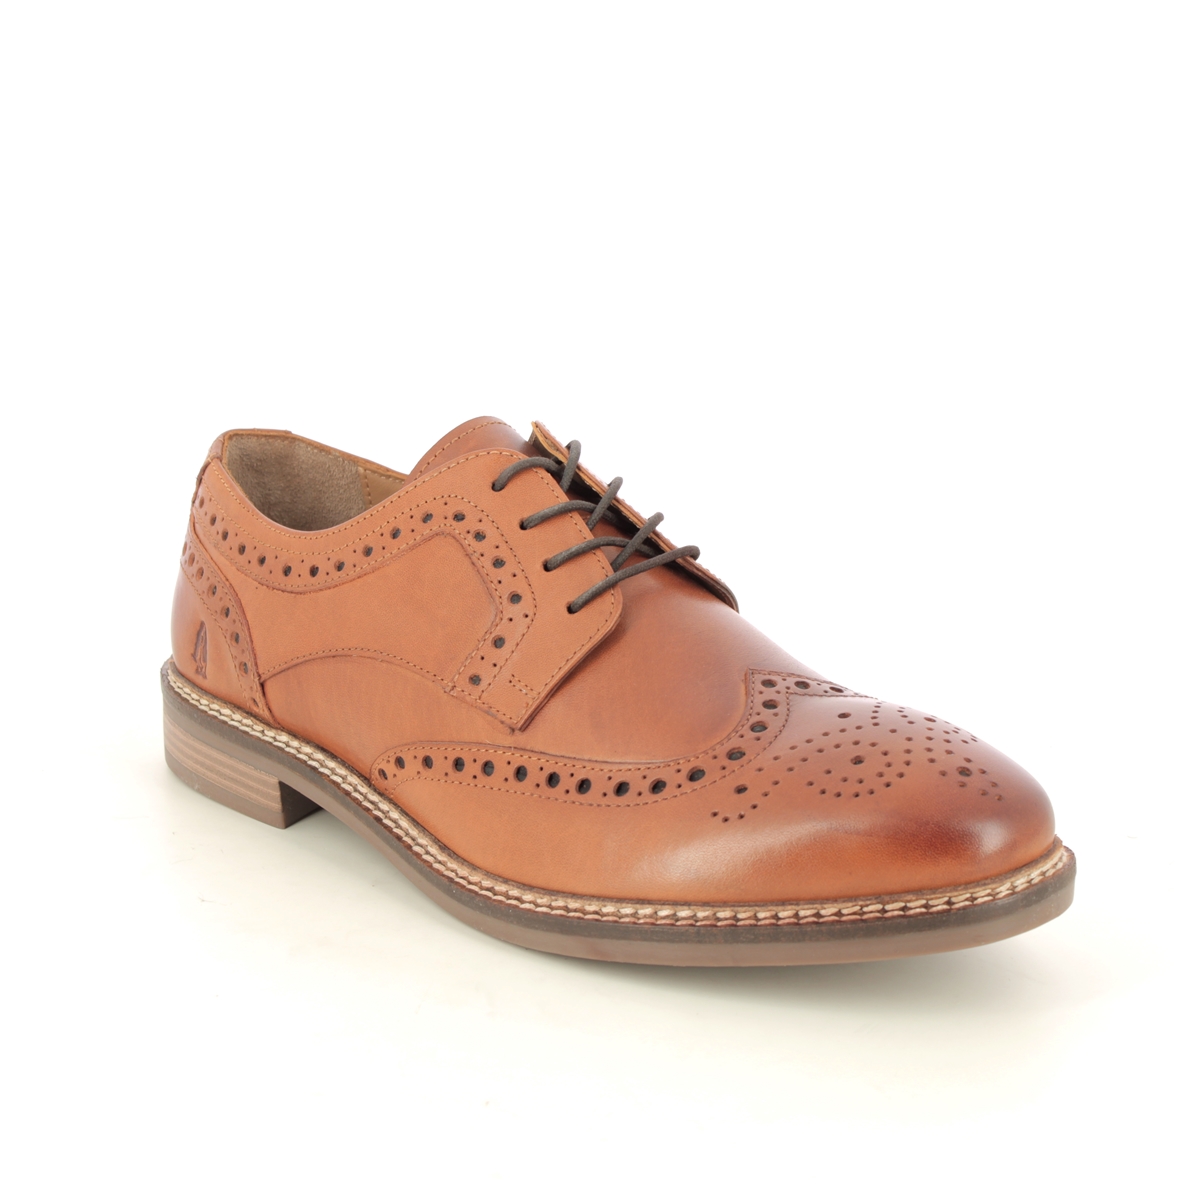 Hush Puppies - Bryson (Tan Leather ) 12355-11 In Size 10 In Plain Tan Leather